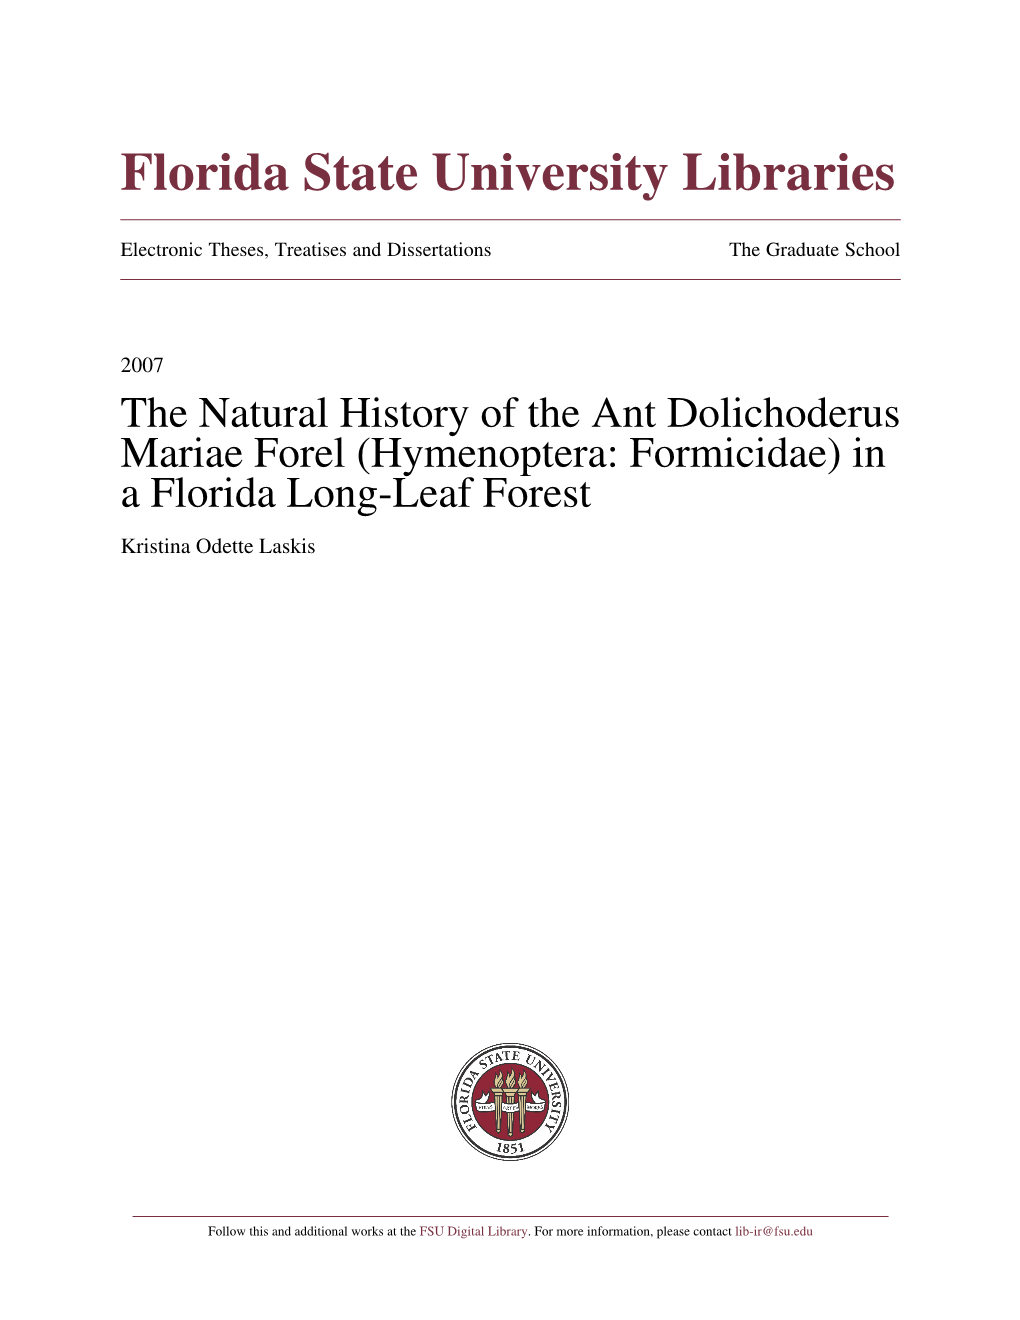 The Natural History of the Ant Dolichoderus Mariae Forel (Hymenoptera: Formicidae) in a Florida Long-Leaf Forest Kristina Odette Laskis